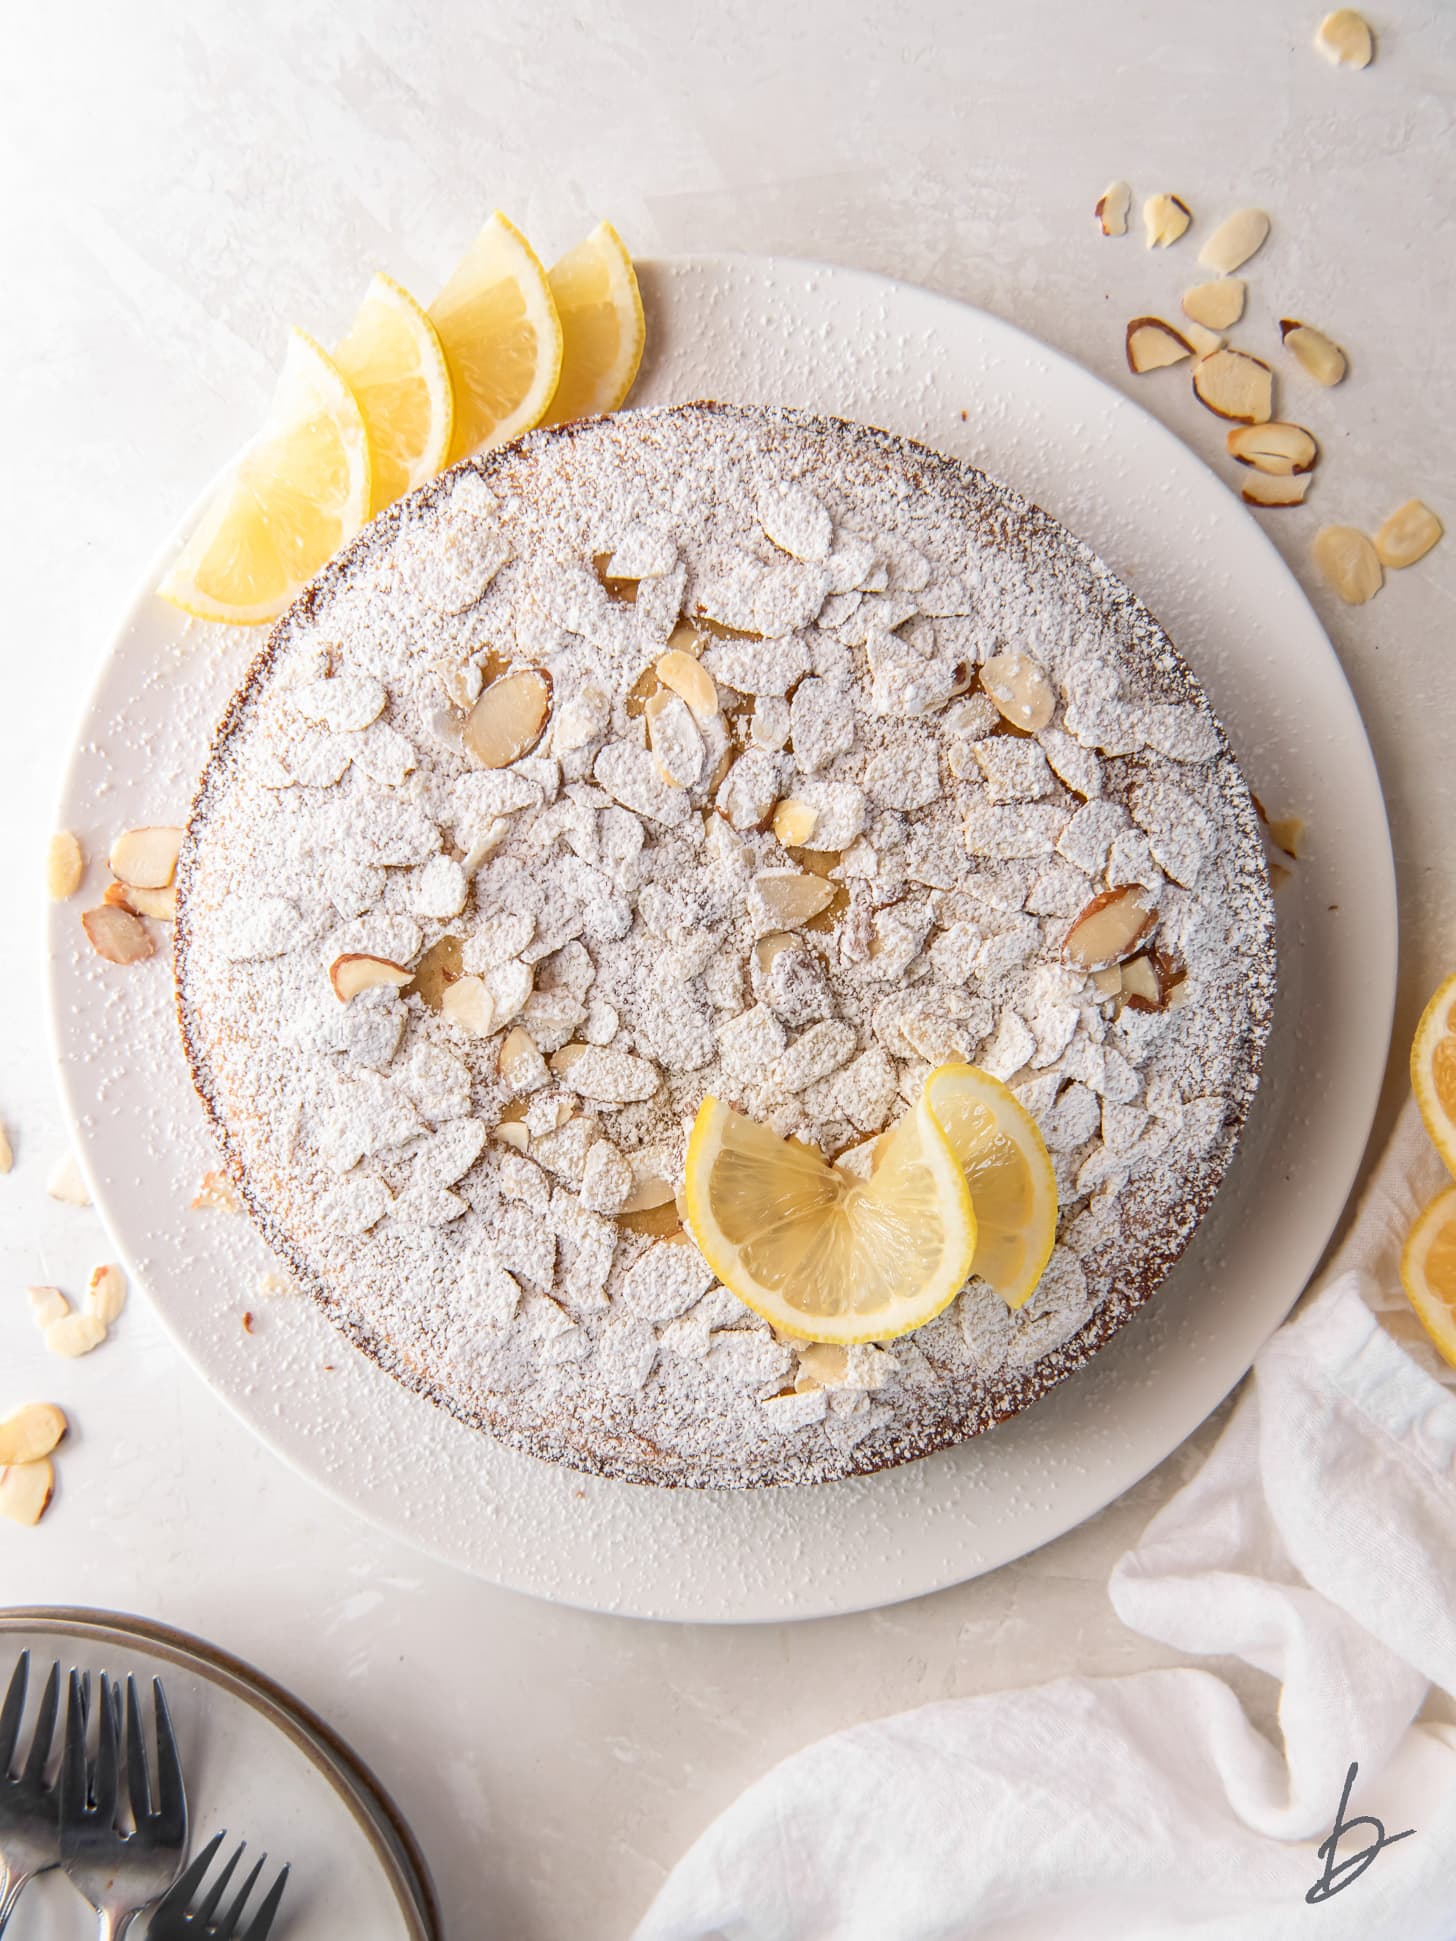 lemon ricotta cake with almonds, confectioners' sugar and lemon wedges as garnish.